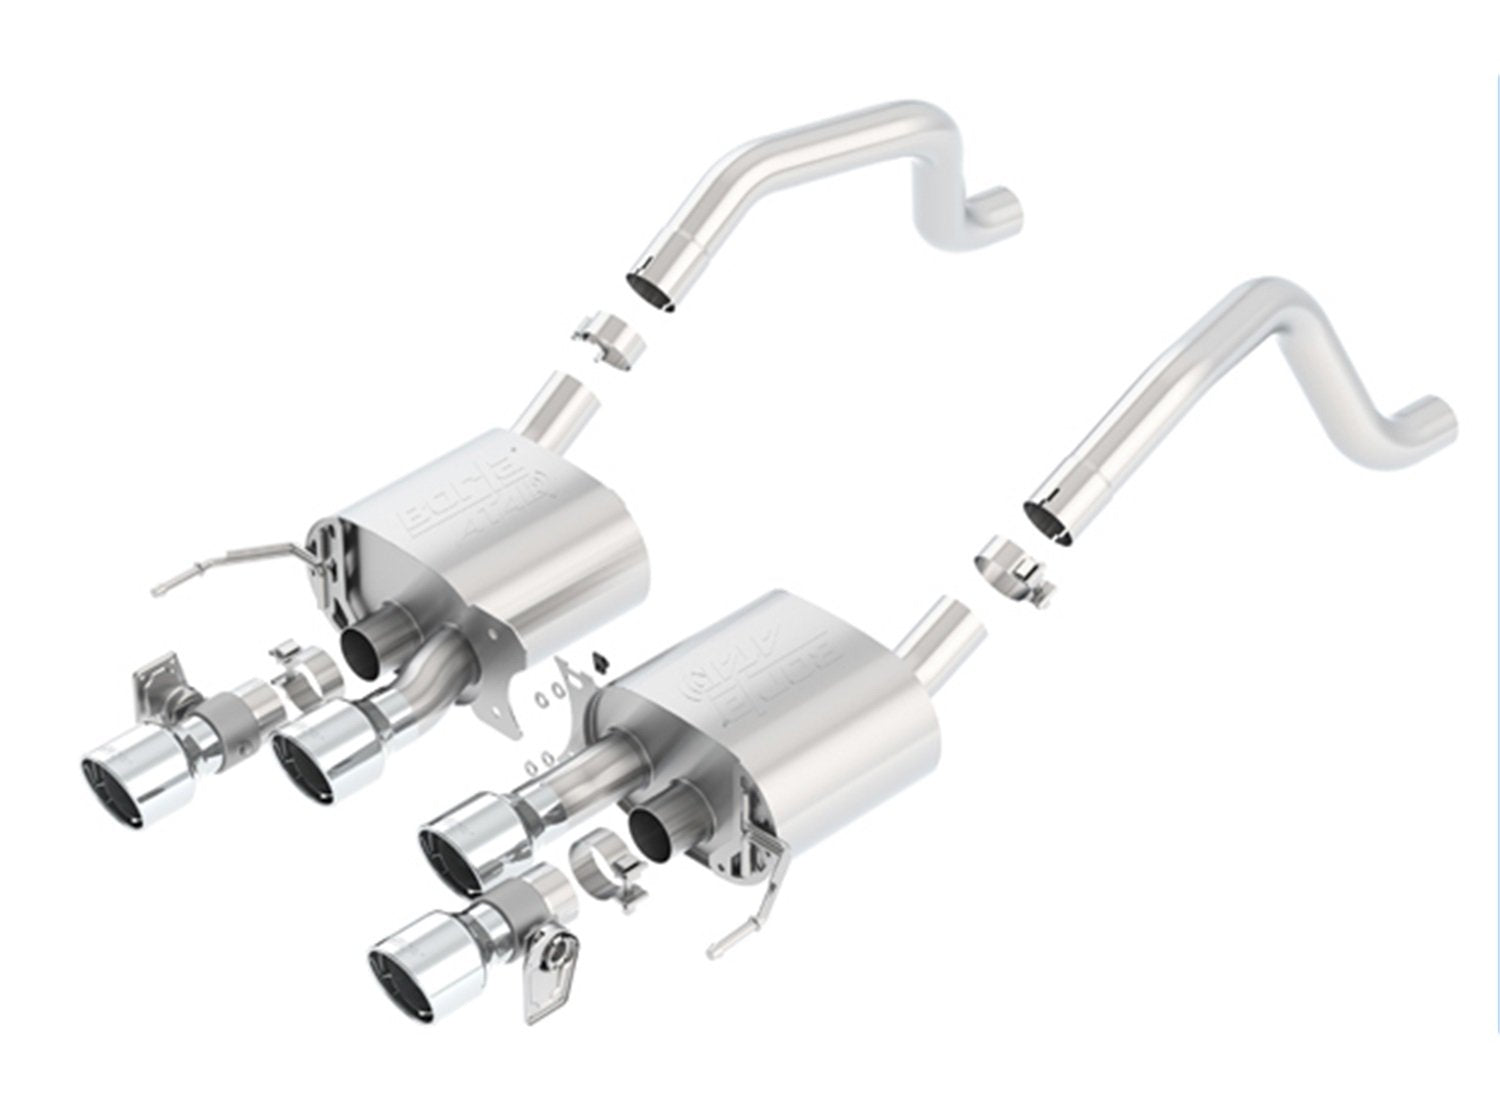 BORLA 11903 ATAK Rear Section Exhaust System (round intercooled tips, with NPP)